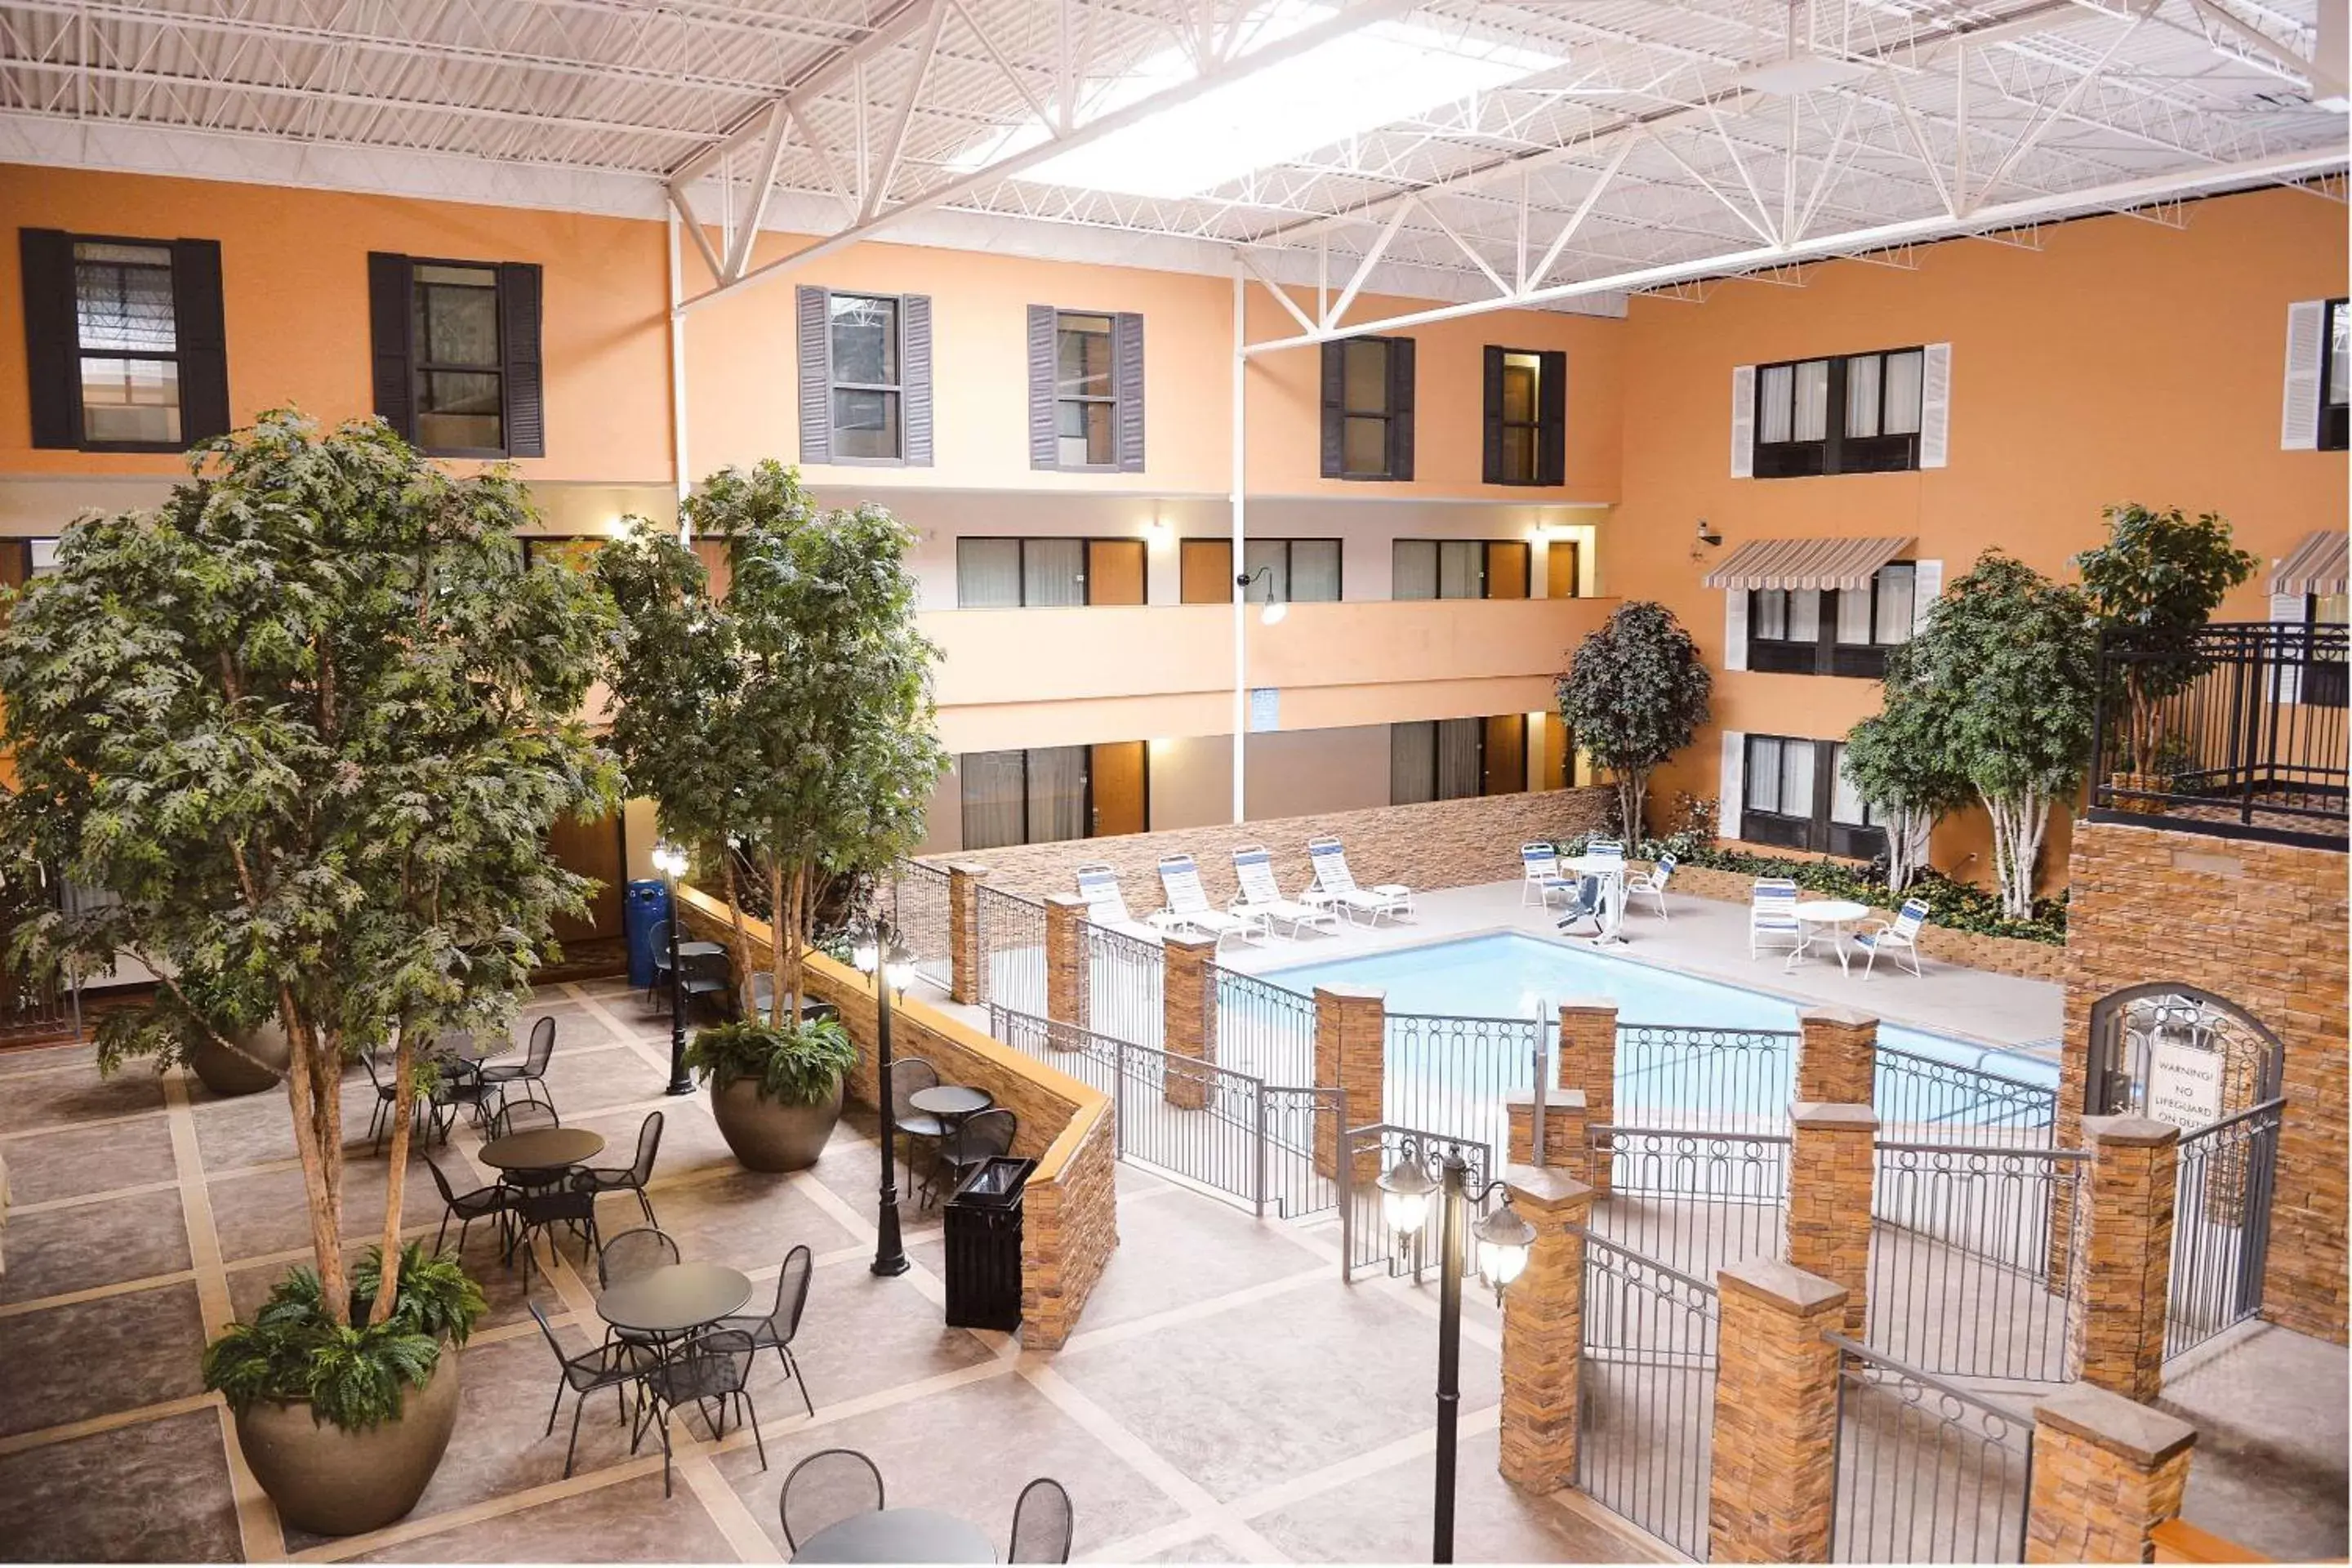 On site, Pool View in Quality Inn & Suites Ames Conference Center Near ISU Campus